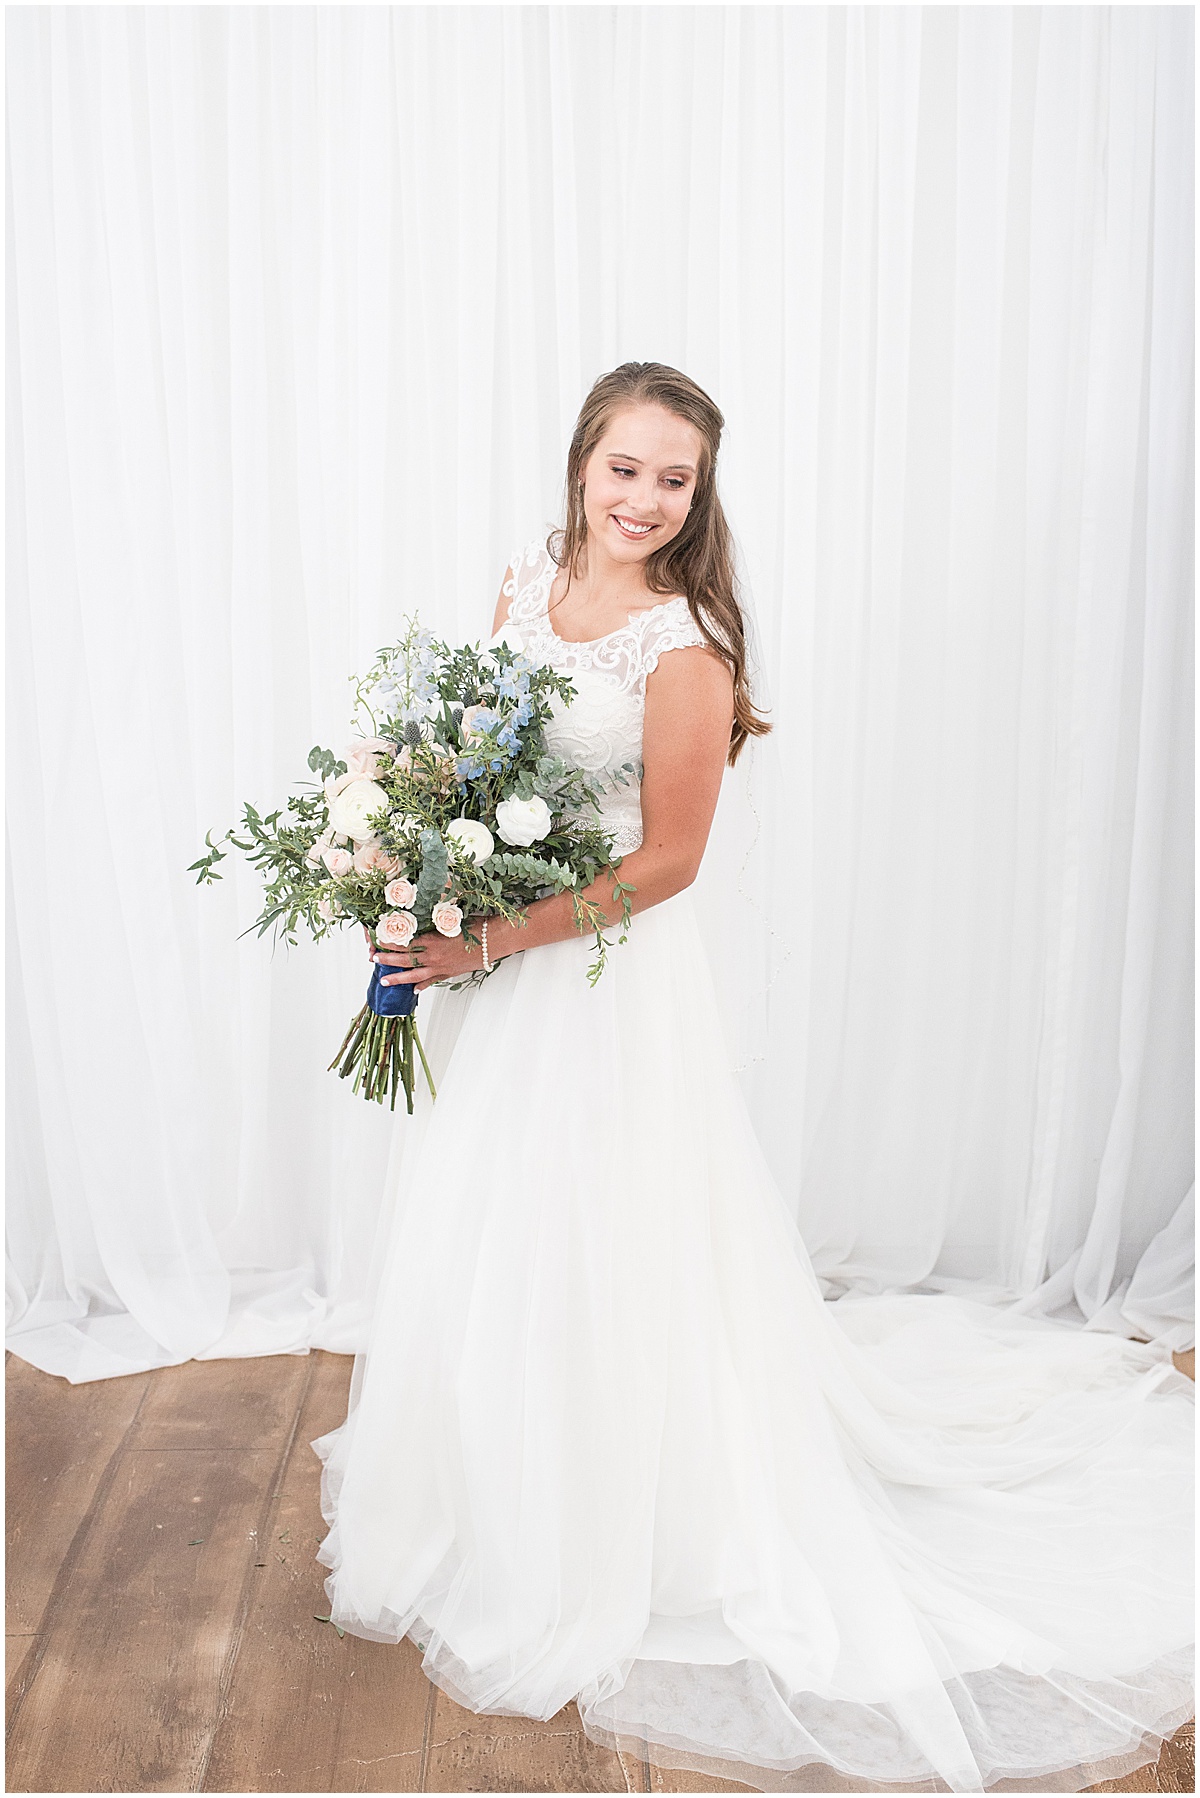 Bridal Portraits at The Blessing Barn in Lafayette, Indiana